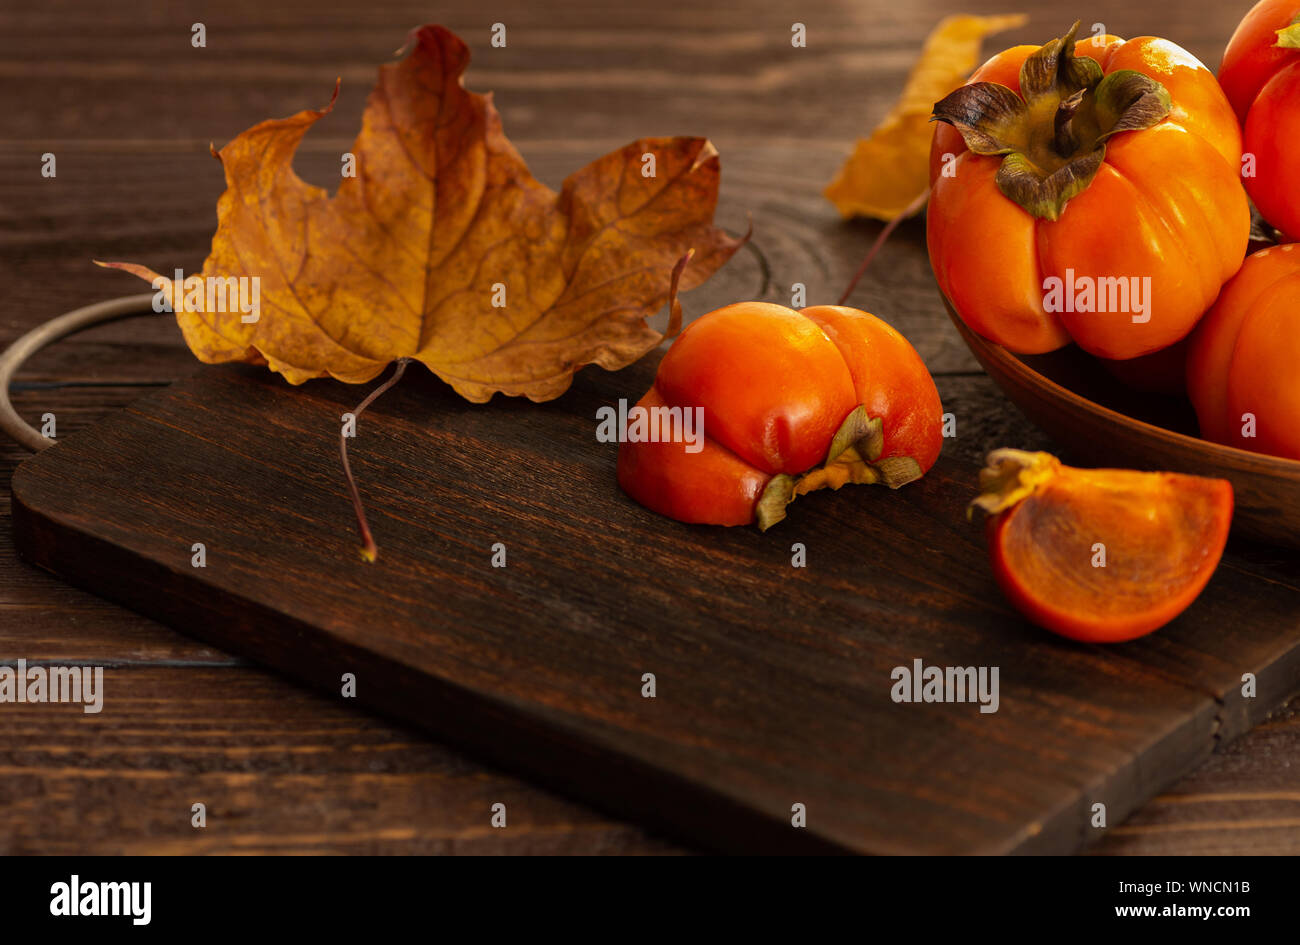 Ripe persimmons on a wooden background. Persimmon variety Fuyu. Close-up. Stock Photo